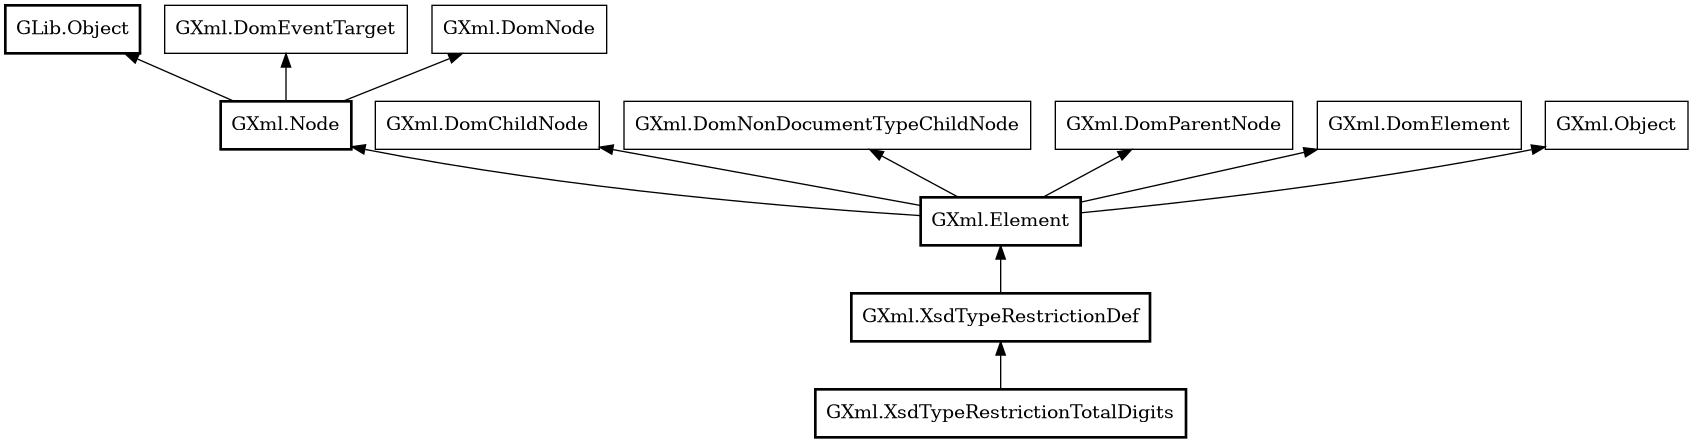 Object hierarchy for XsdTypeRestrictionTotalDigits